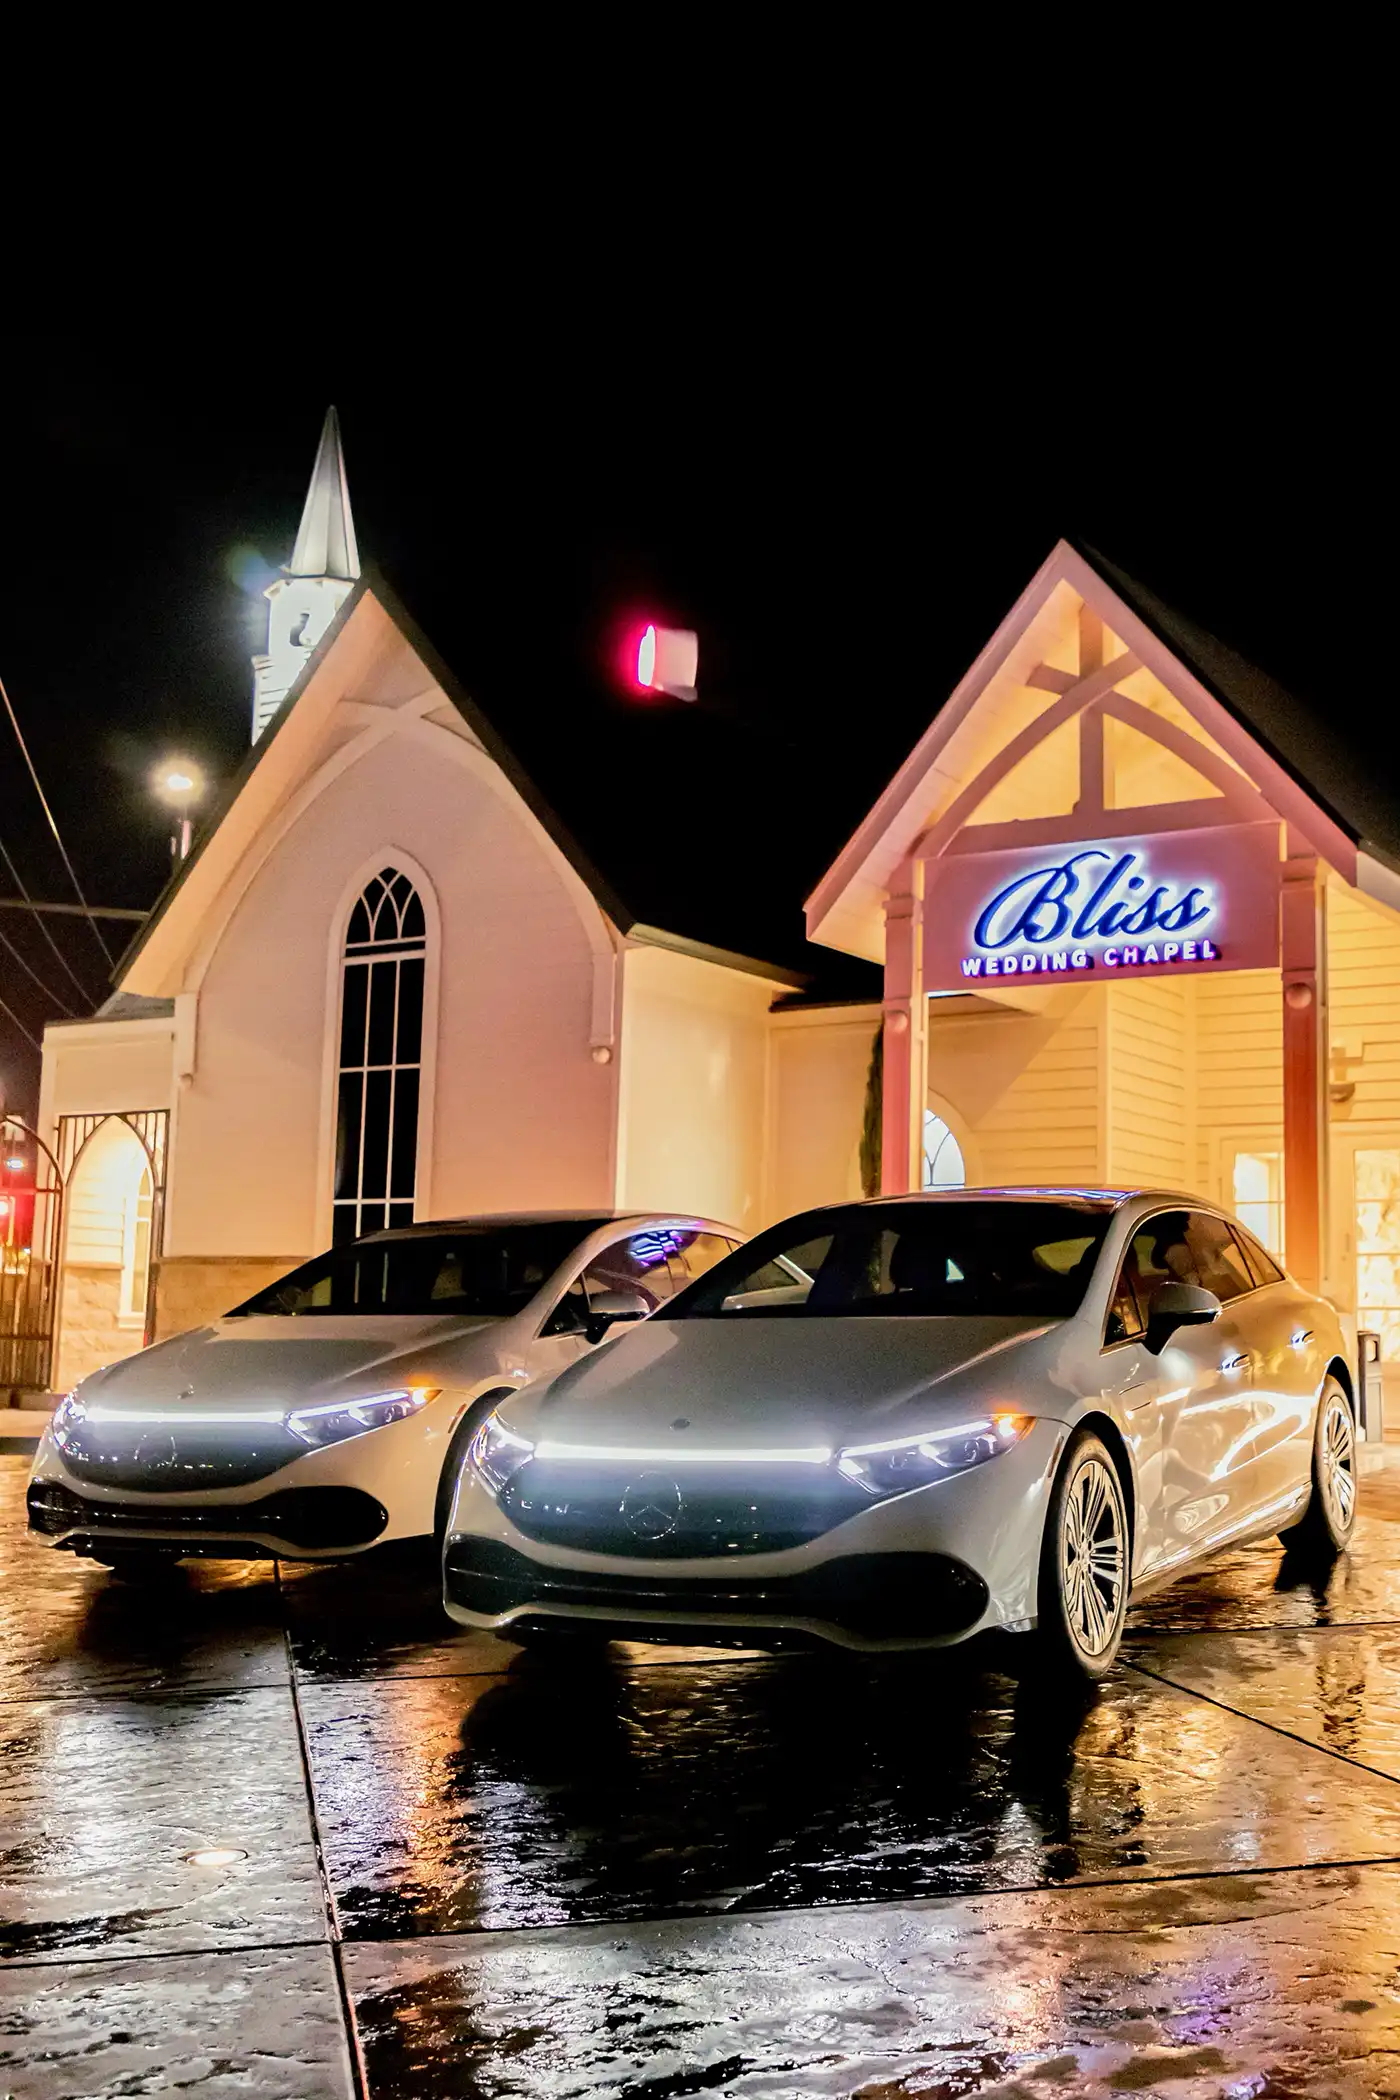 Mercedes EQS Series Luxury Transportation in front of Bliss Wedding Chapel